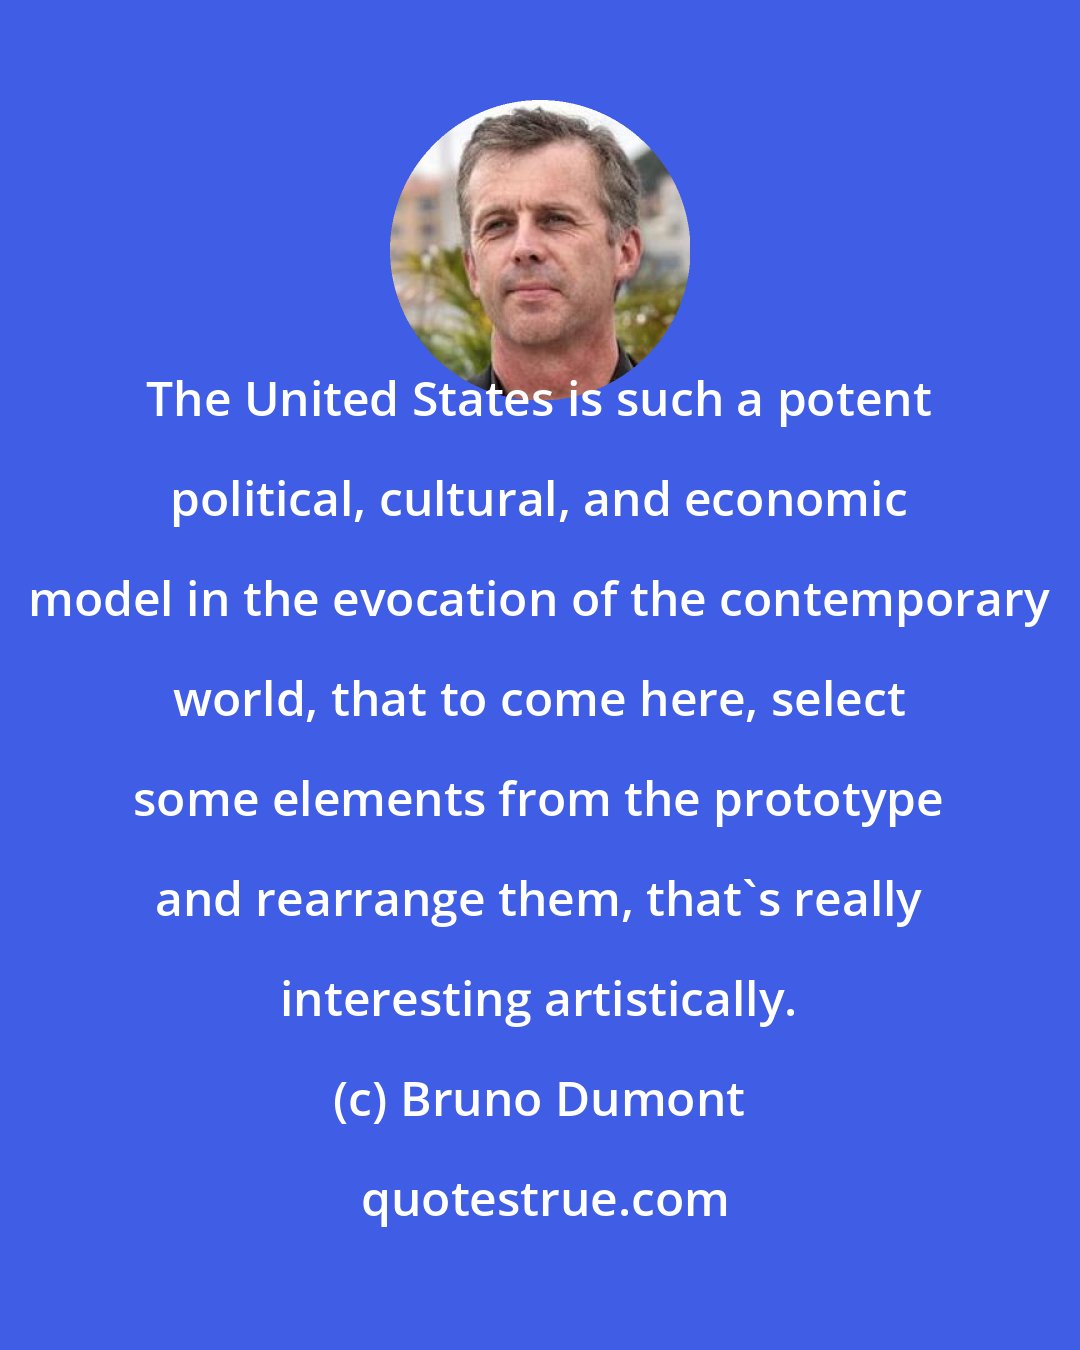 Bruno Dumont: The United States is such a potent political, cultural, and economic model in the evocation of the contemporary world, that to come here, select some elements from the prototype and rearrange them, that's really interesting artistically.